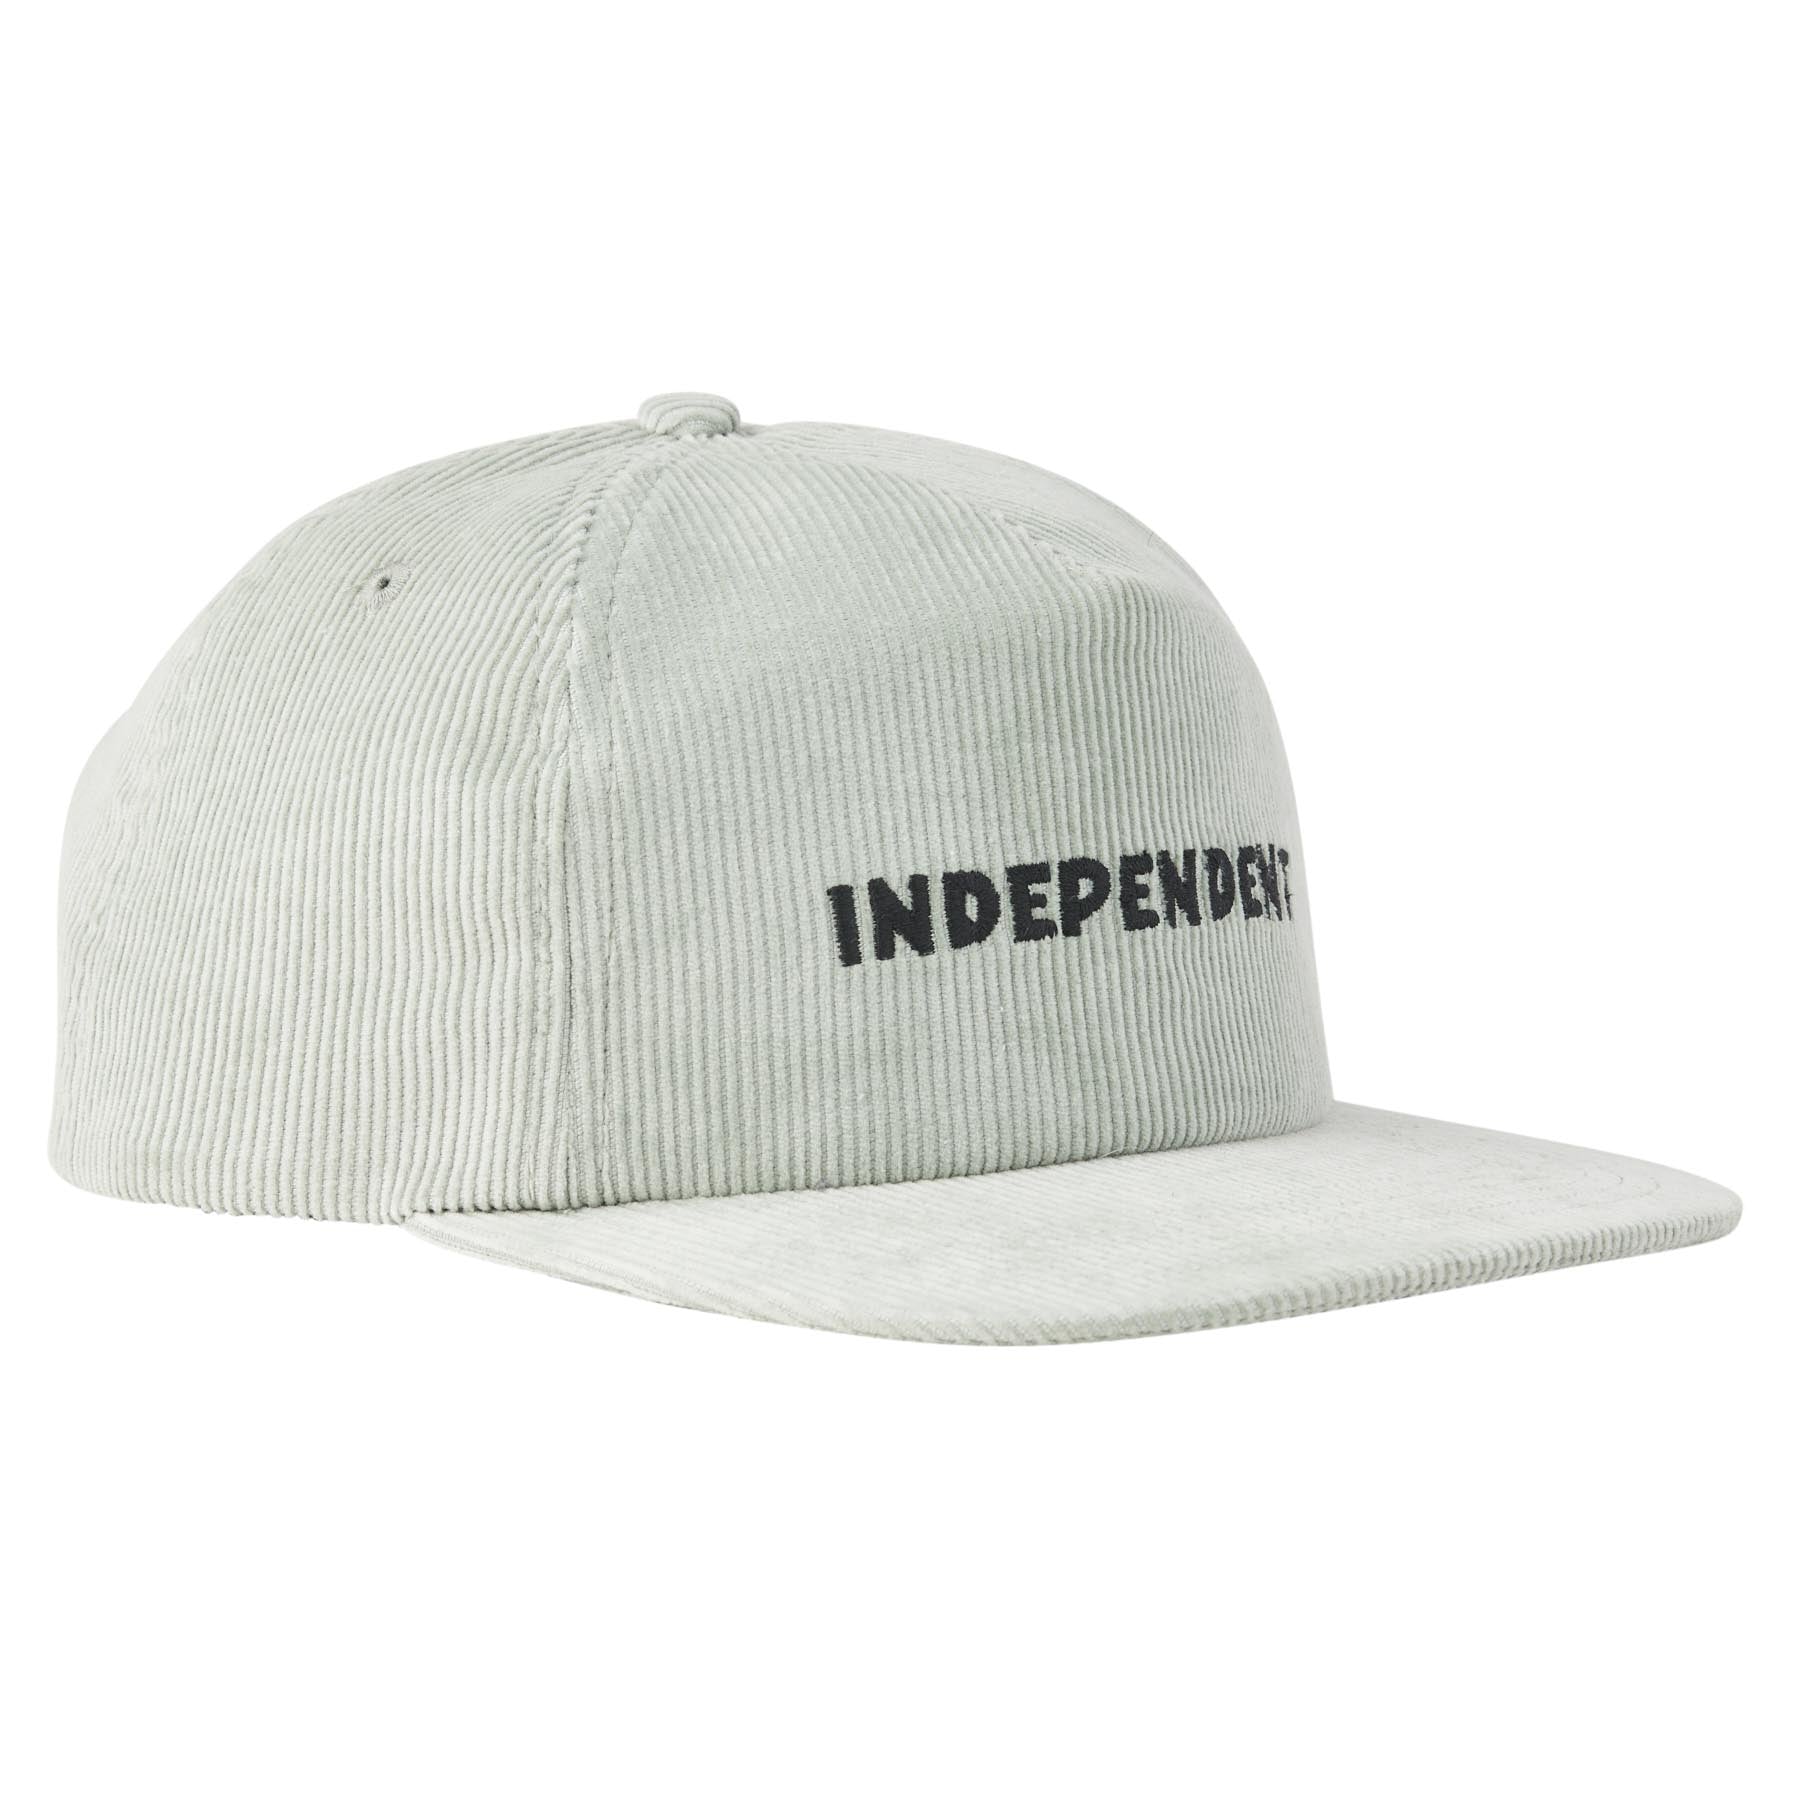 Independent Beacon Snapback Unstructured Mid Hat Grey OS Unisex - Invisible Board Shop